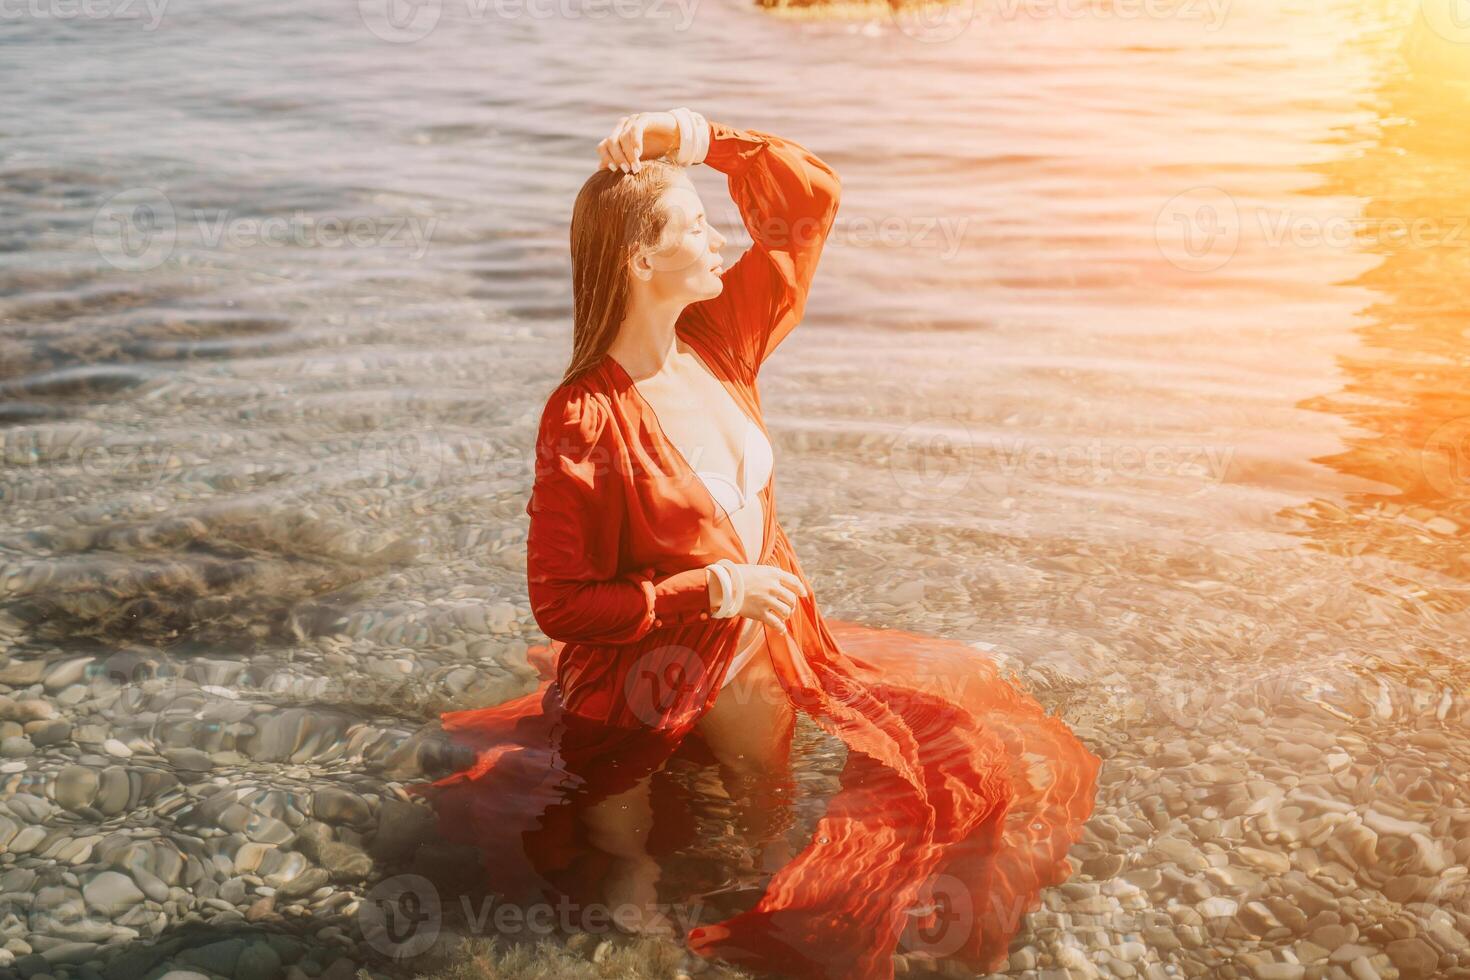 Woman travel sea. Happy tourist in red dress enjoy taking picture outdoors for memories. Woman traveler posing in sea beach, surrounded by volcanic mountains, sharing travel adventure journey photo